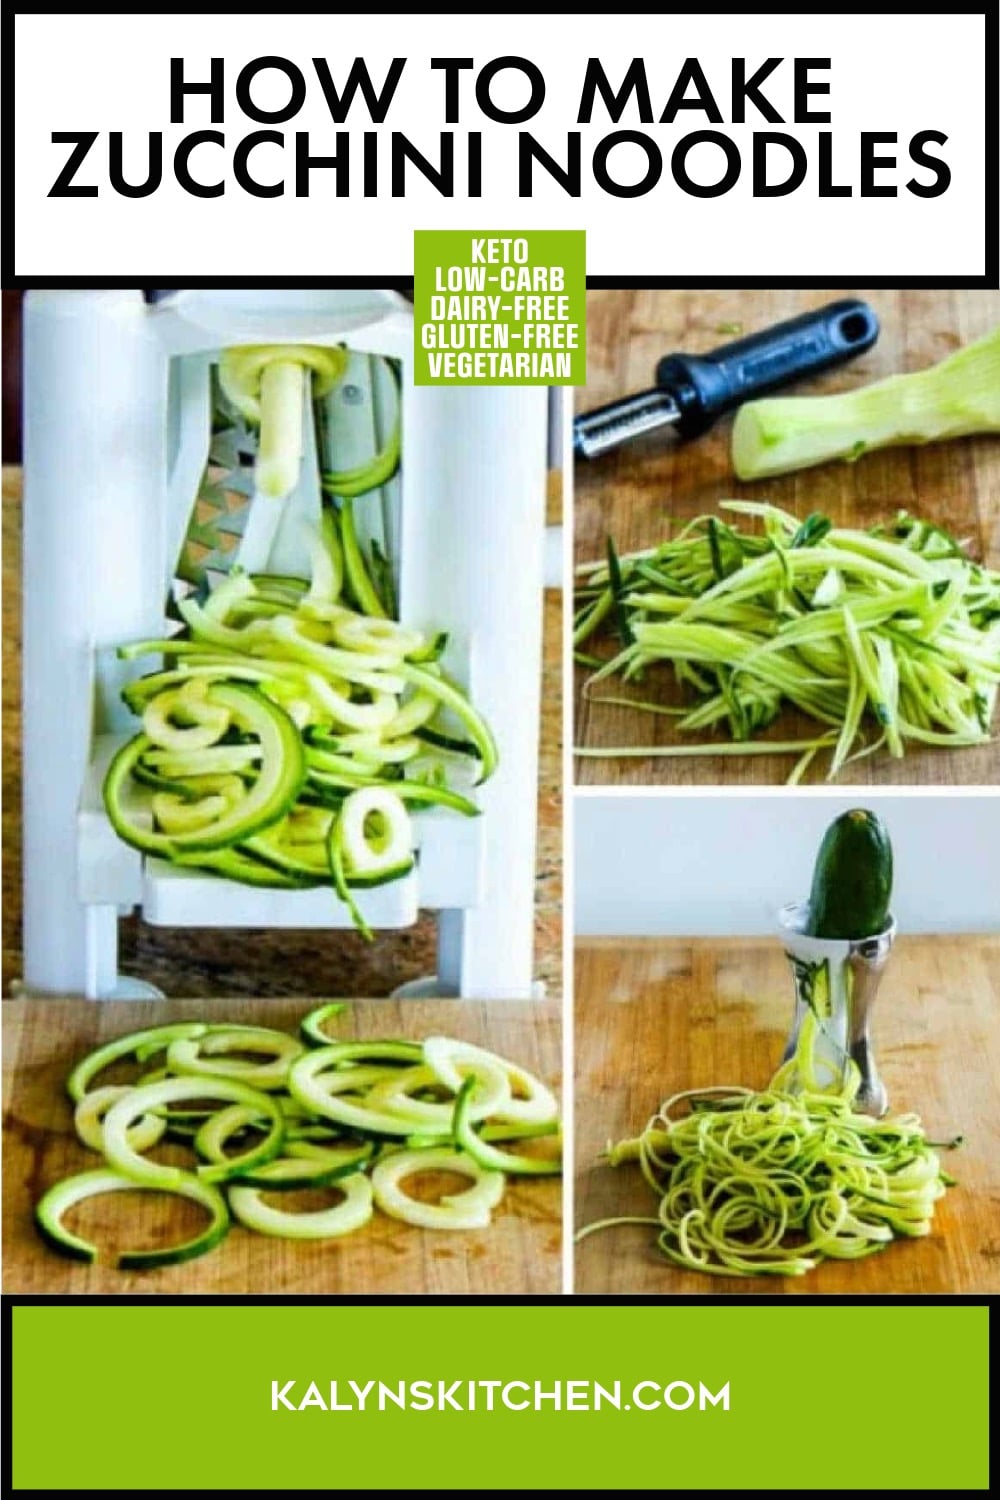 Pinterest image of How to Make Zucchini Noodles